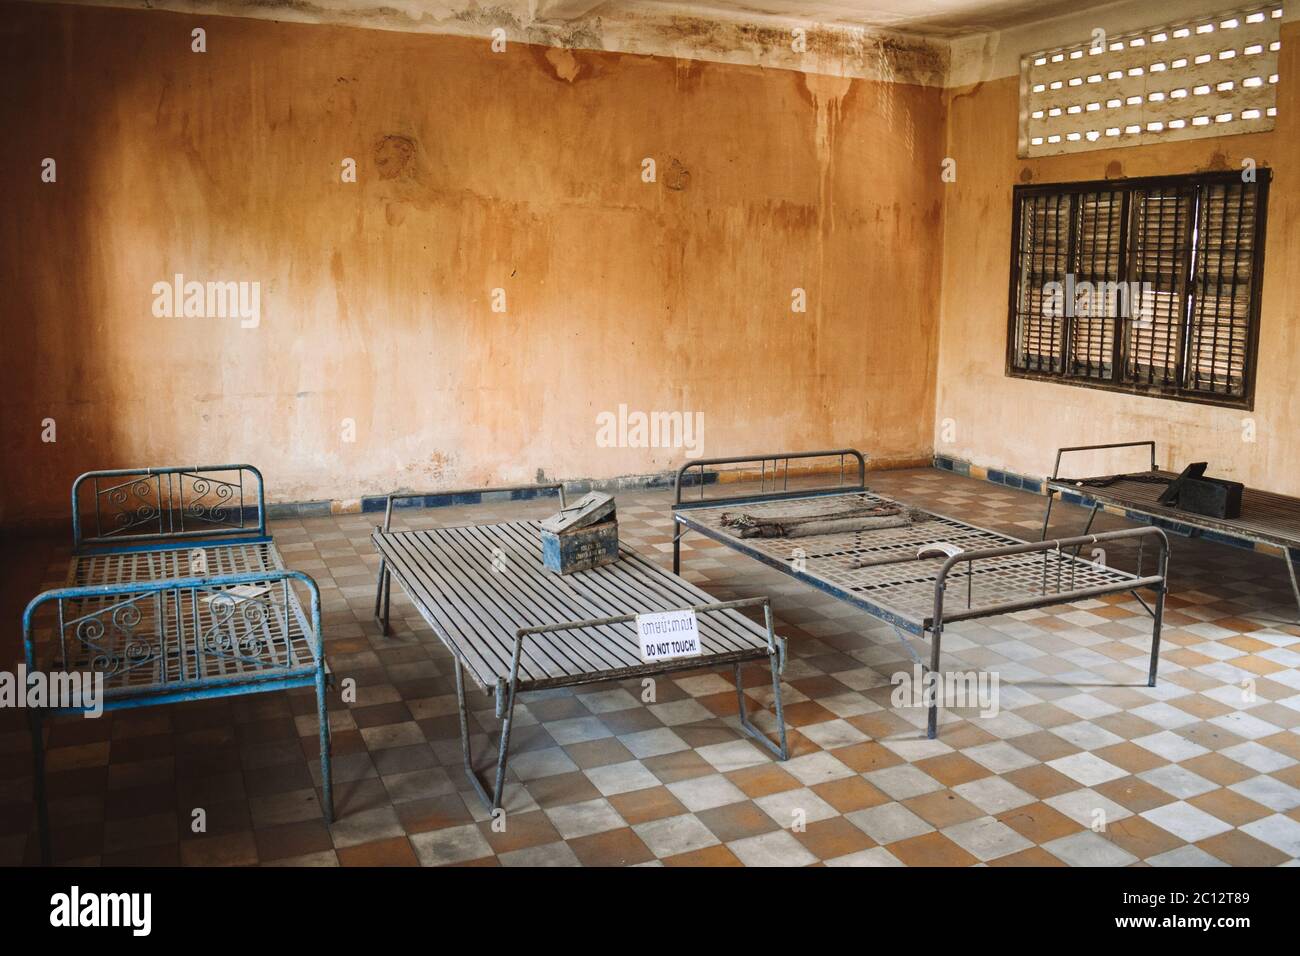 Room with beds in S21 Tuol Sleng Genocide Museum Phnom Penh Cambodia Stock Photo